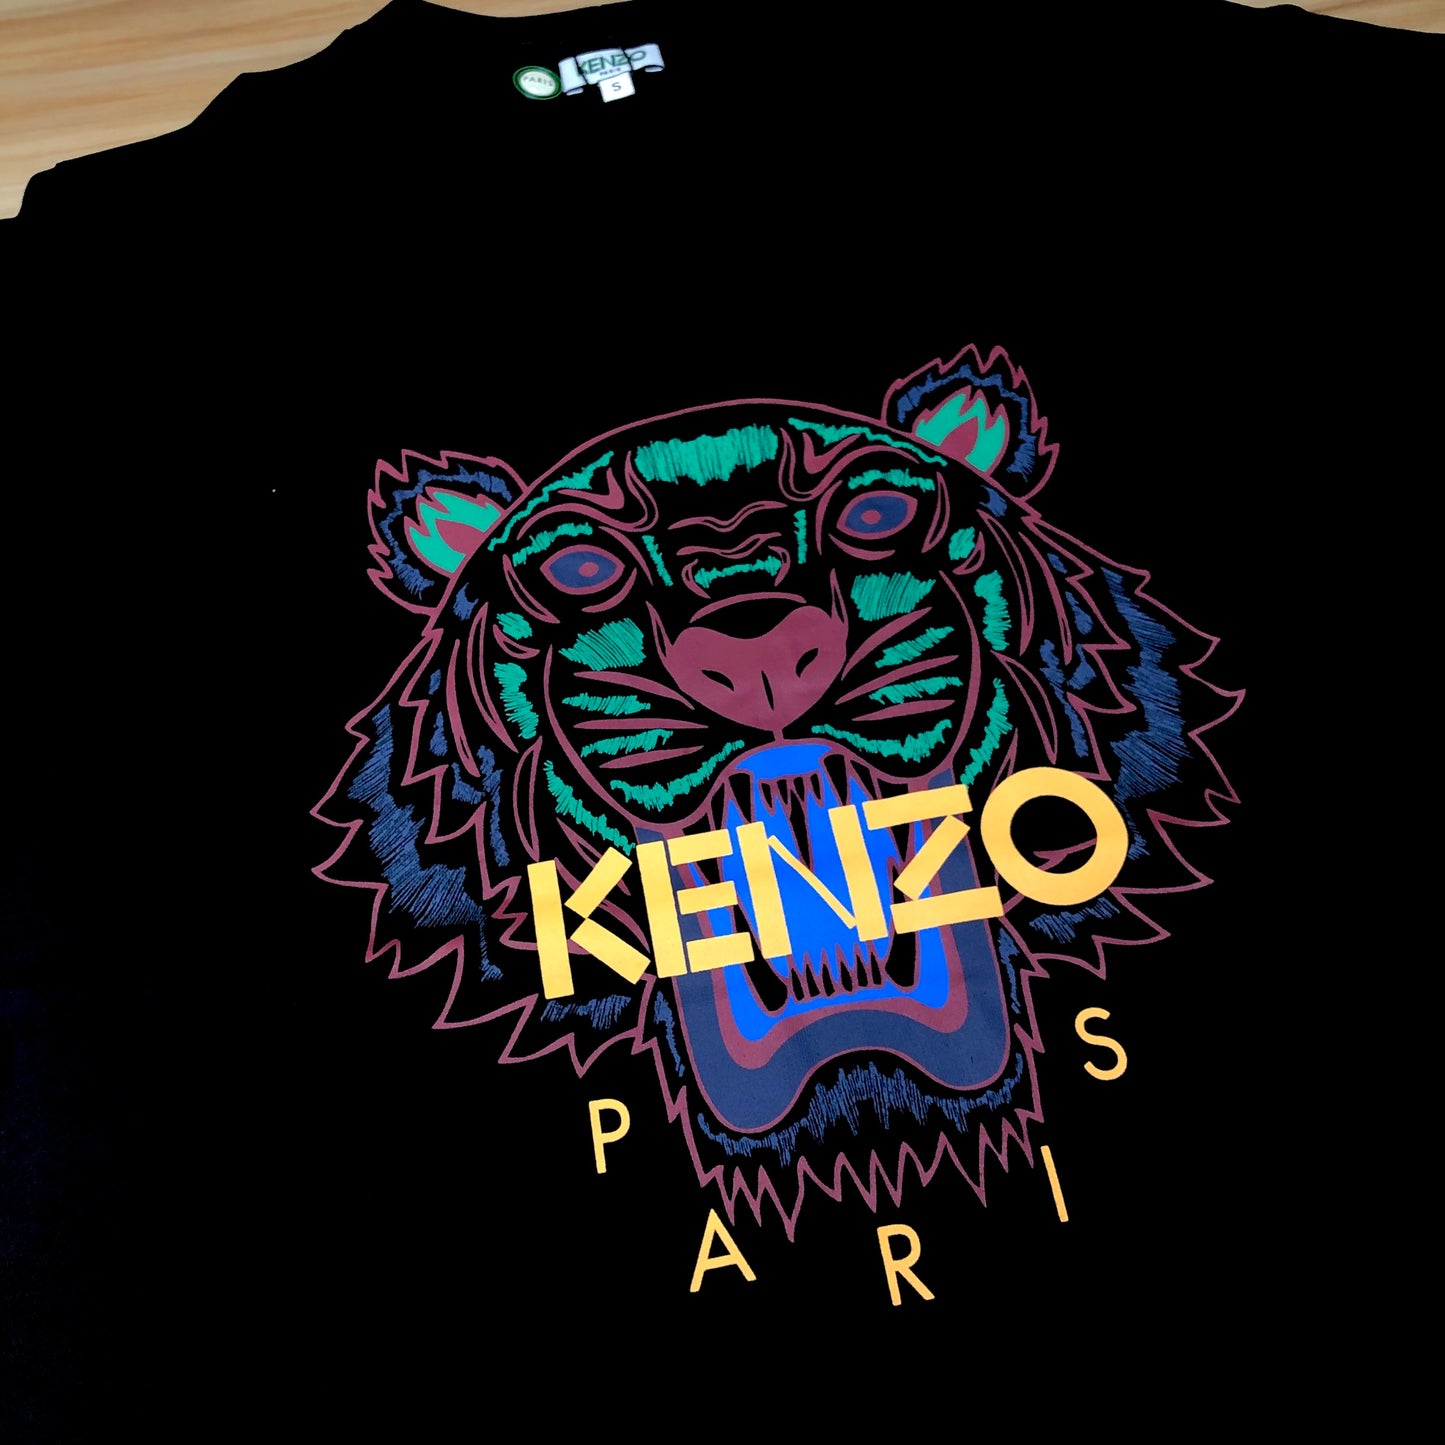 Kenzo Christmas Edition Tiger Logo T-Shirt - Shop Streetwear, Sneakers, Slippers and Gifts online | Malaysia - The Factory KL